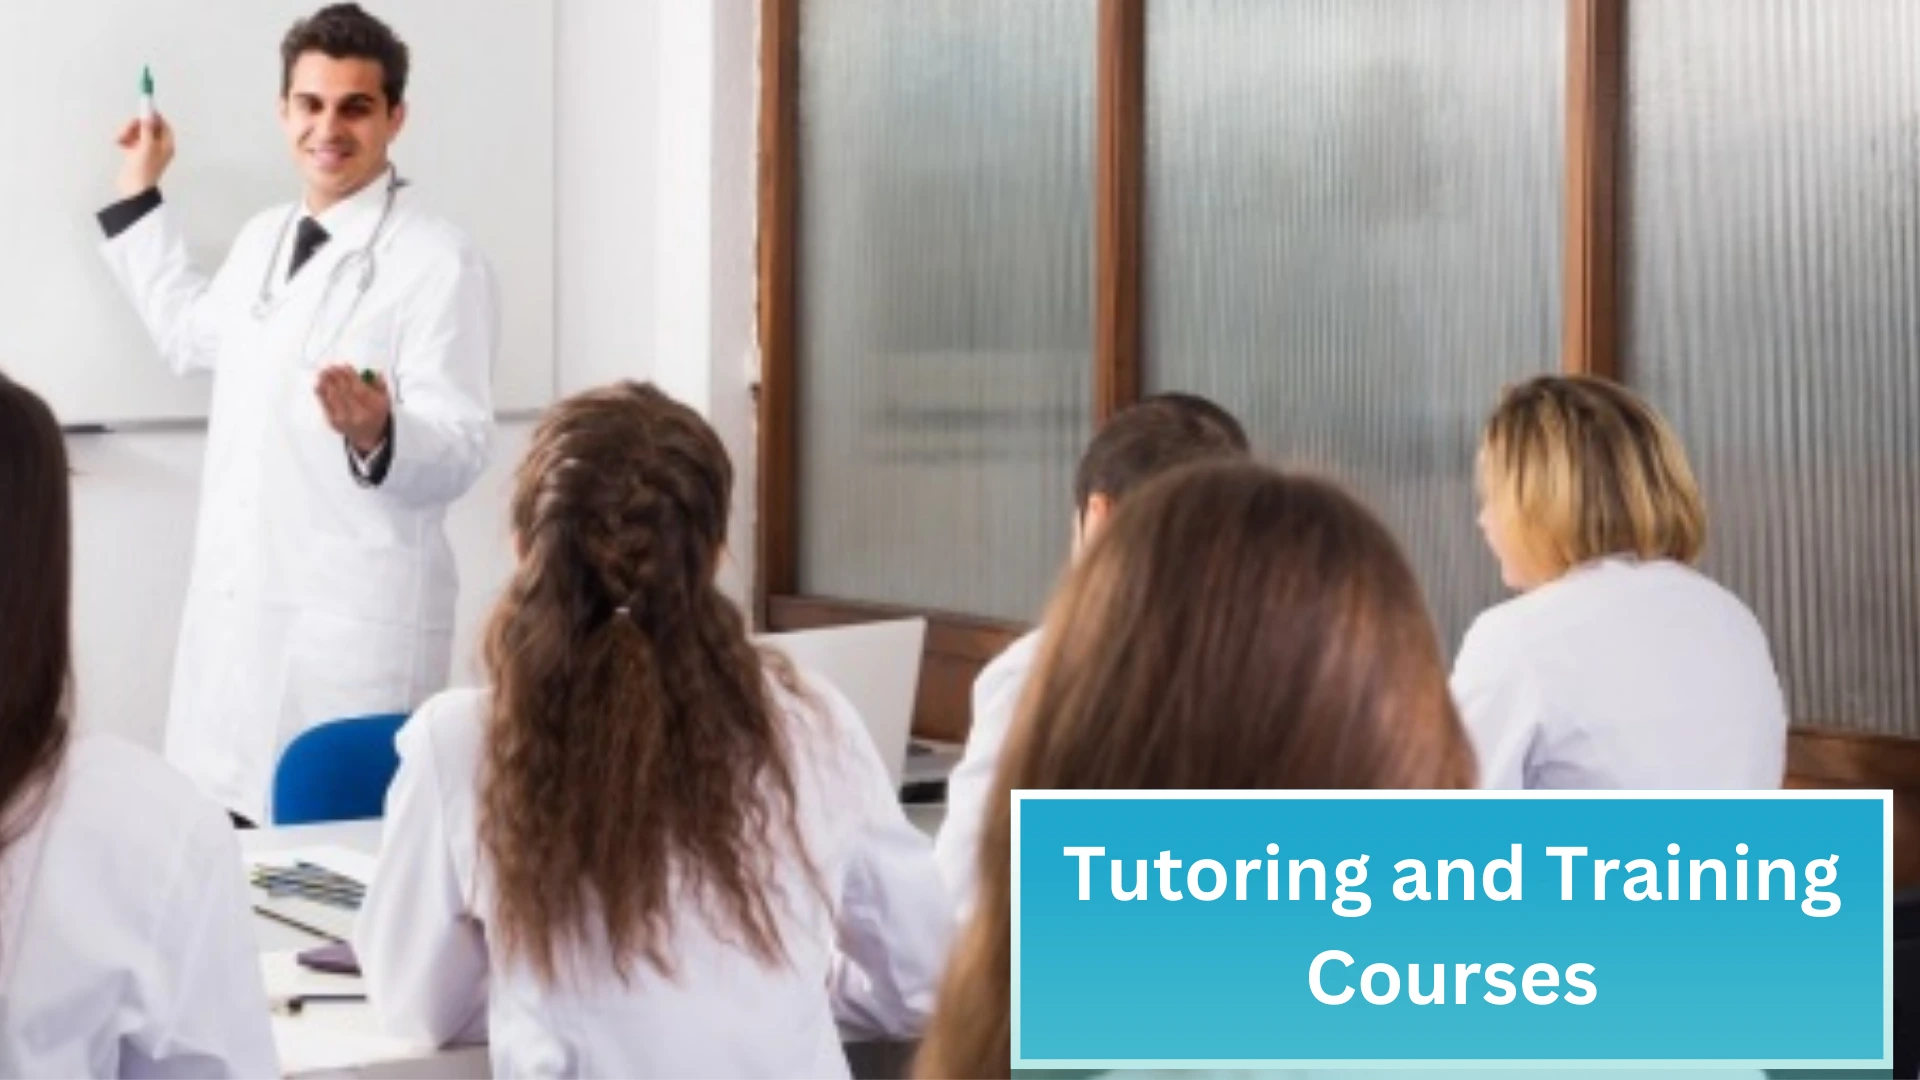 Image featuring a dedicated tutor providing personalized tutoring and training to a student in the medical field.